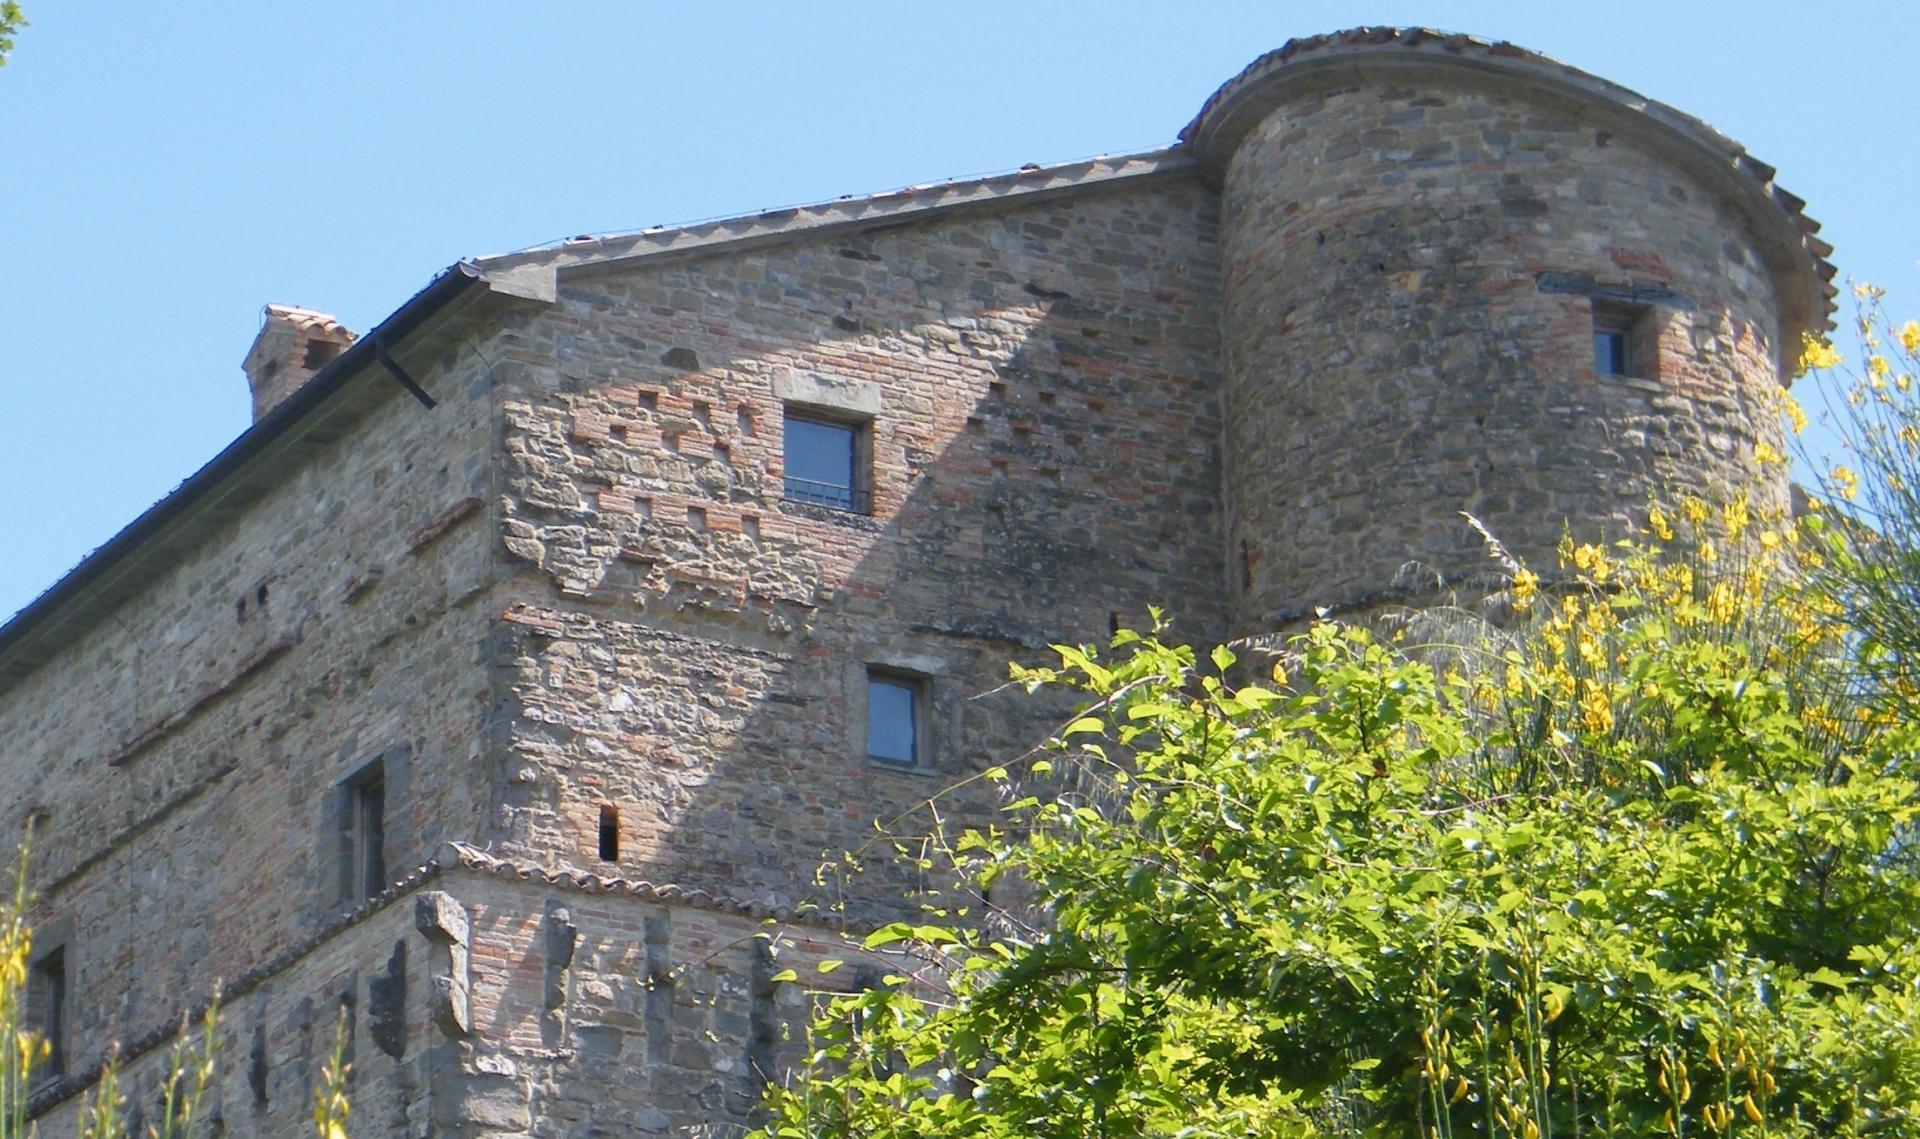 Real Estate Assets of the Umbria Regional Authority